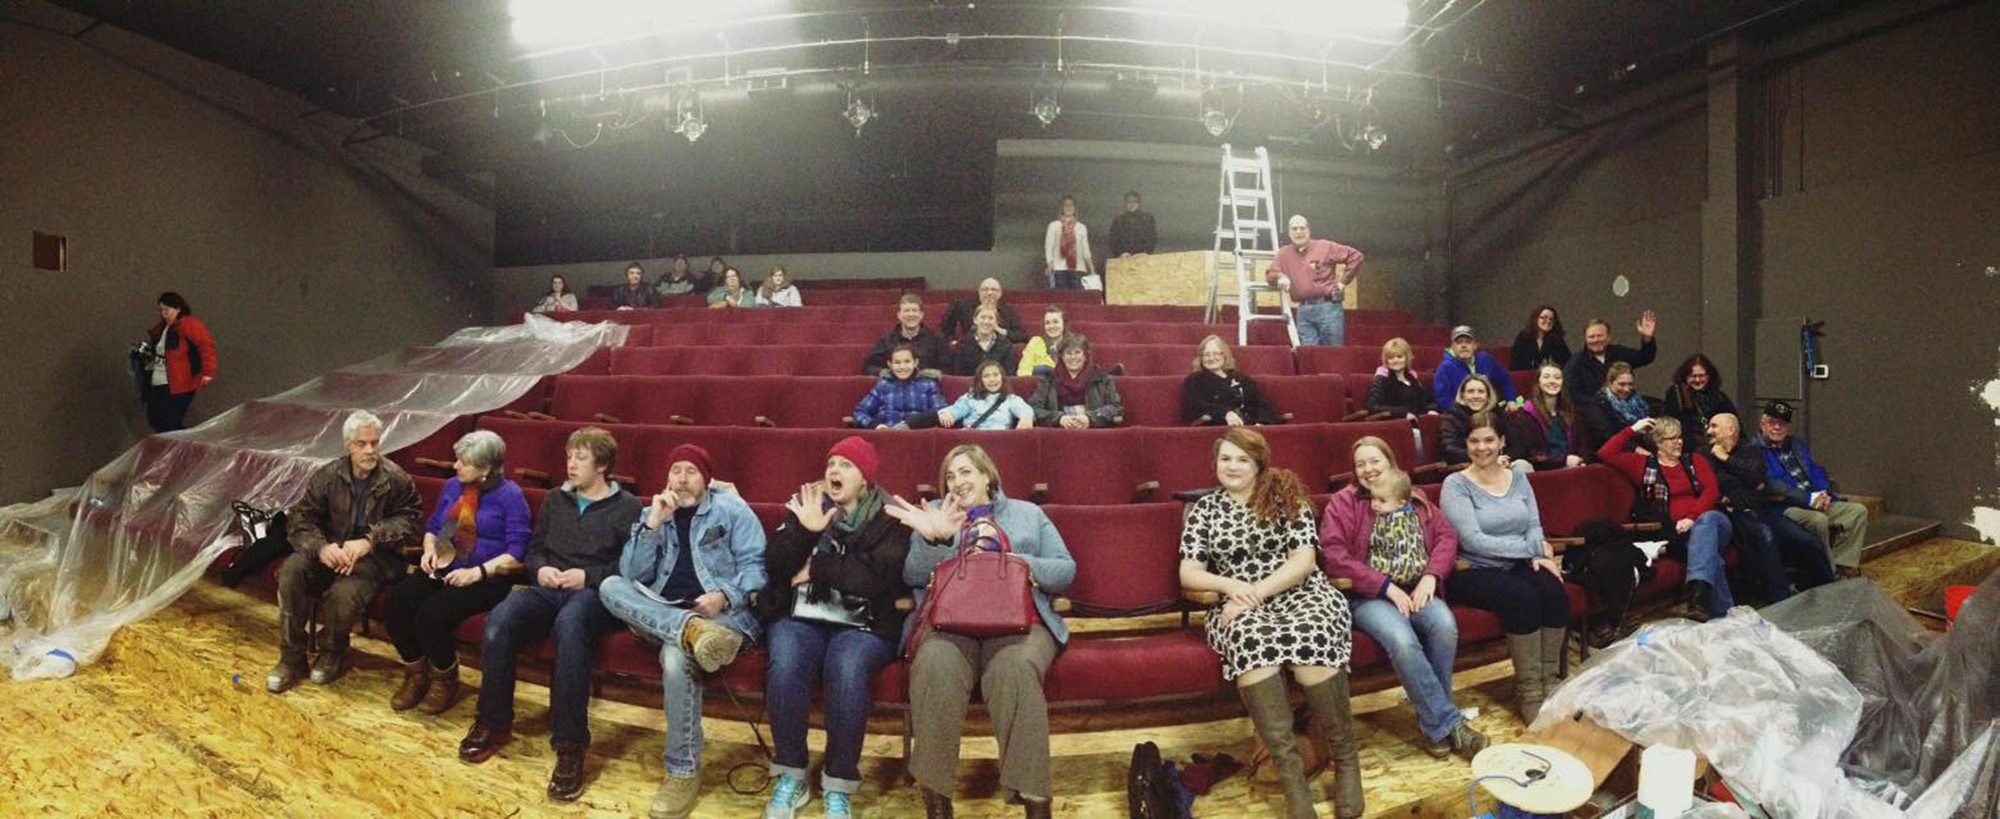 A panoramic view of the new stadium seating -- and some of the volunteers -- at the new Magenta Theater.